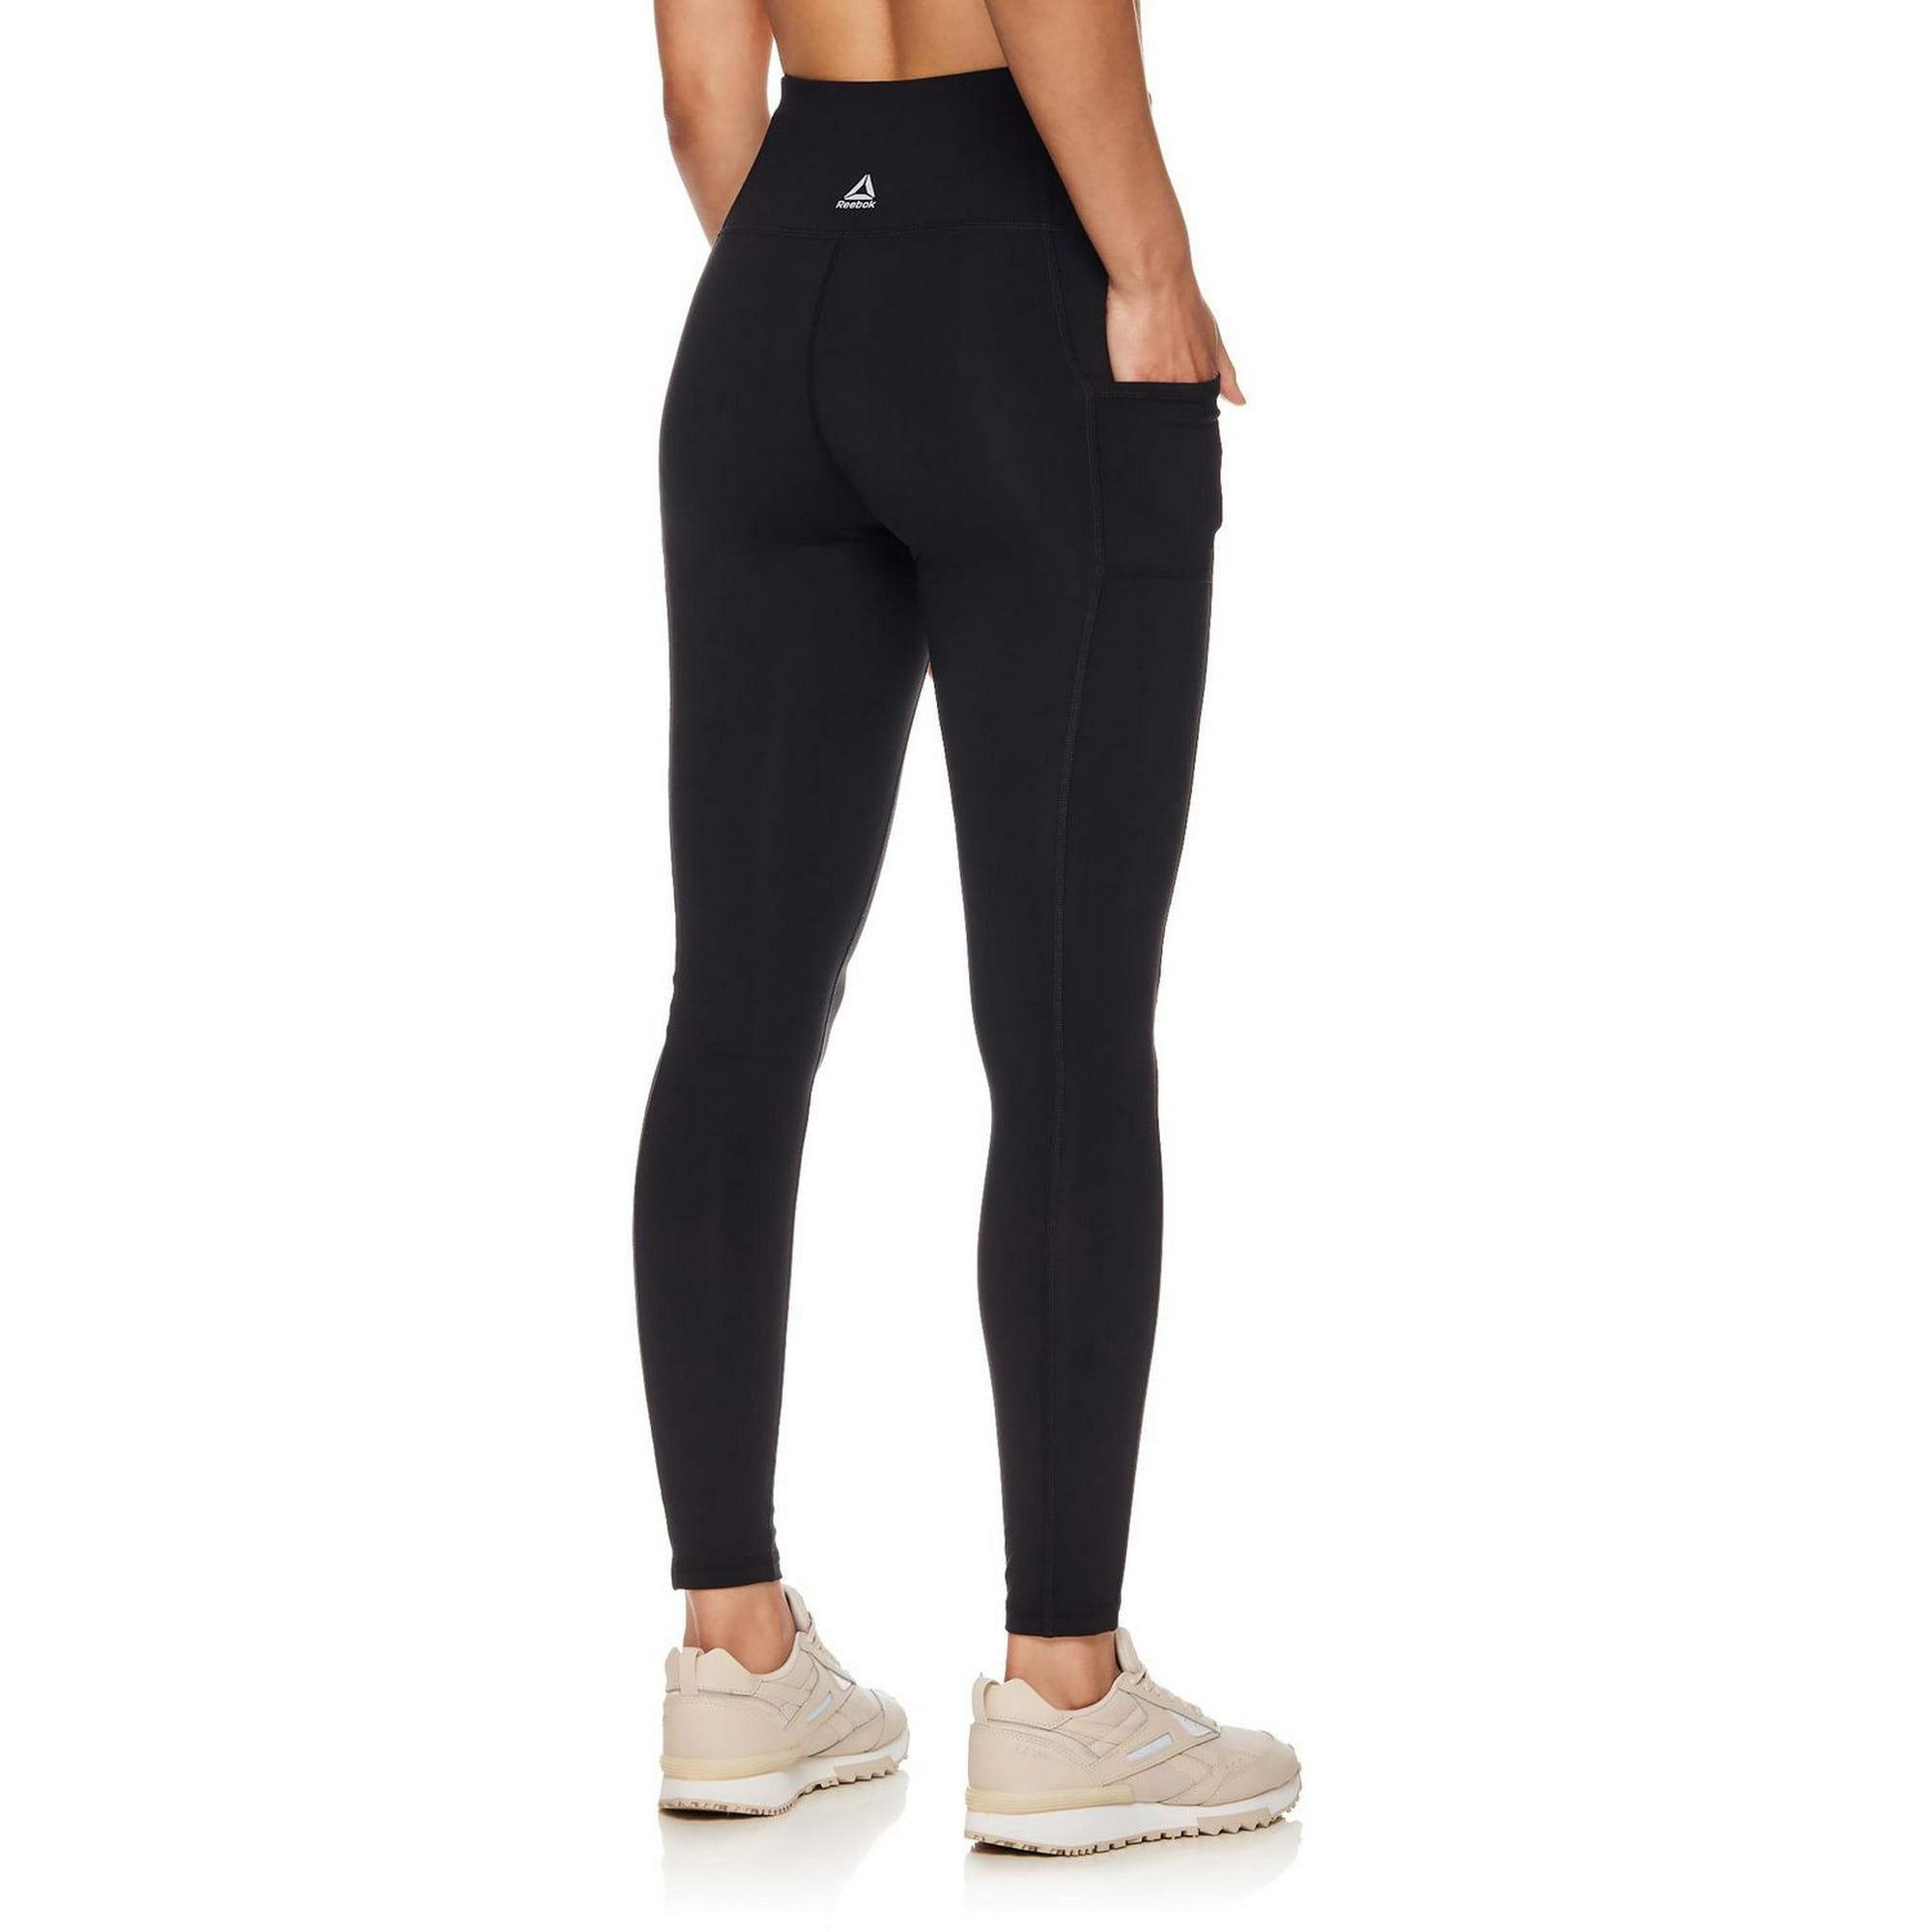 Reebok Women's Fierce Highrise 7/8 Legging with 25 Inseam and